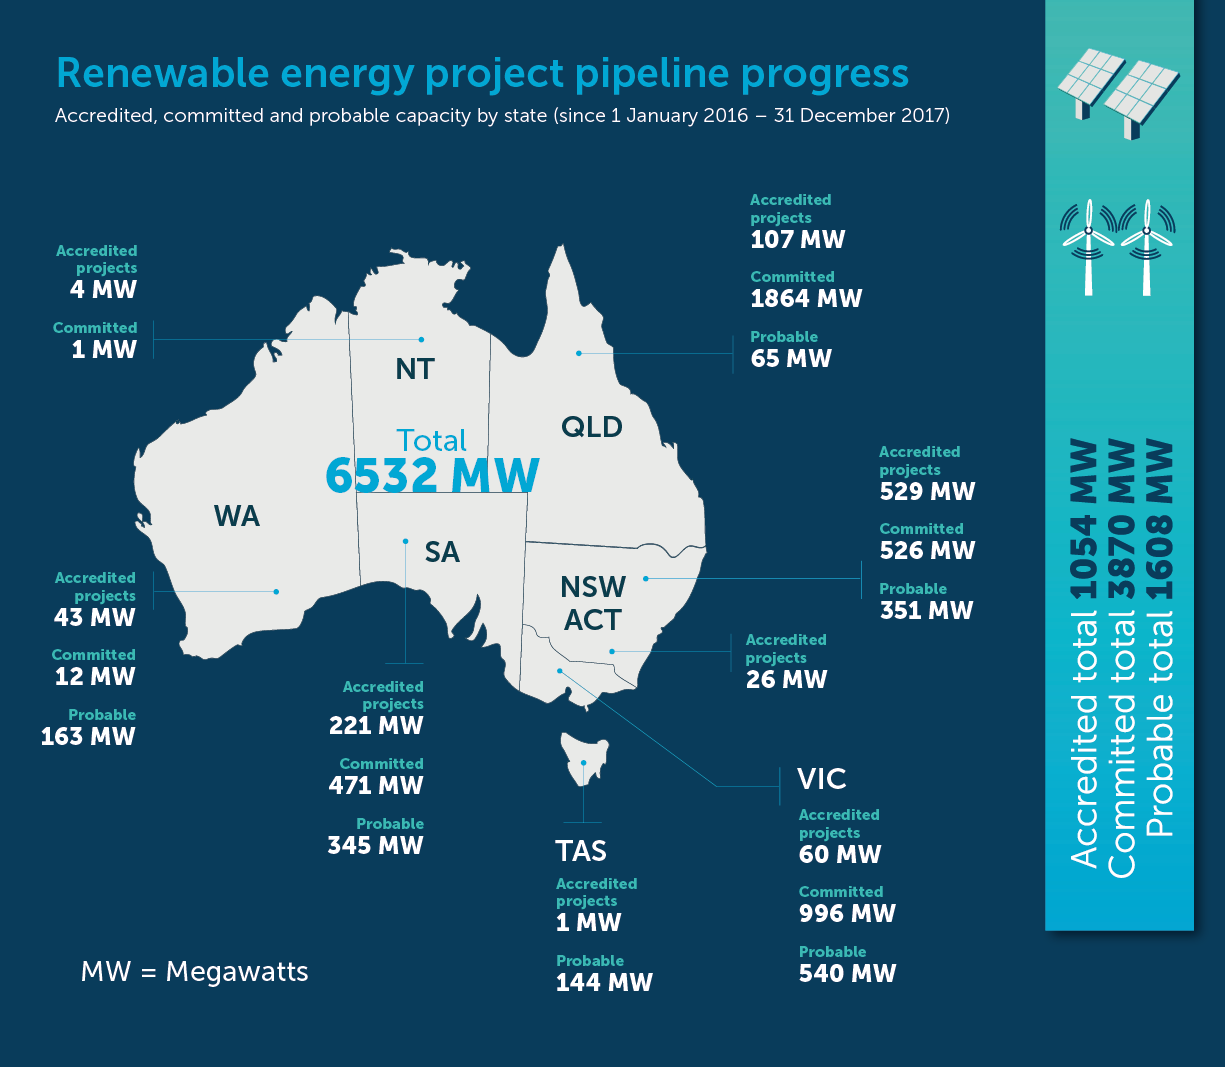 After a record year for Australian renewables, the Clean Energy Council expects 2018 and 2019 to be even bigger. Credit: CER